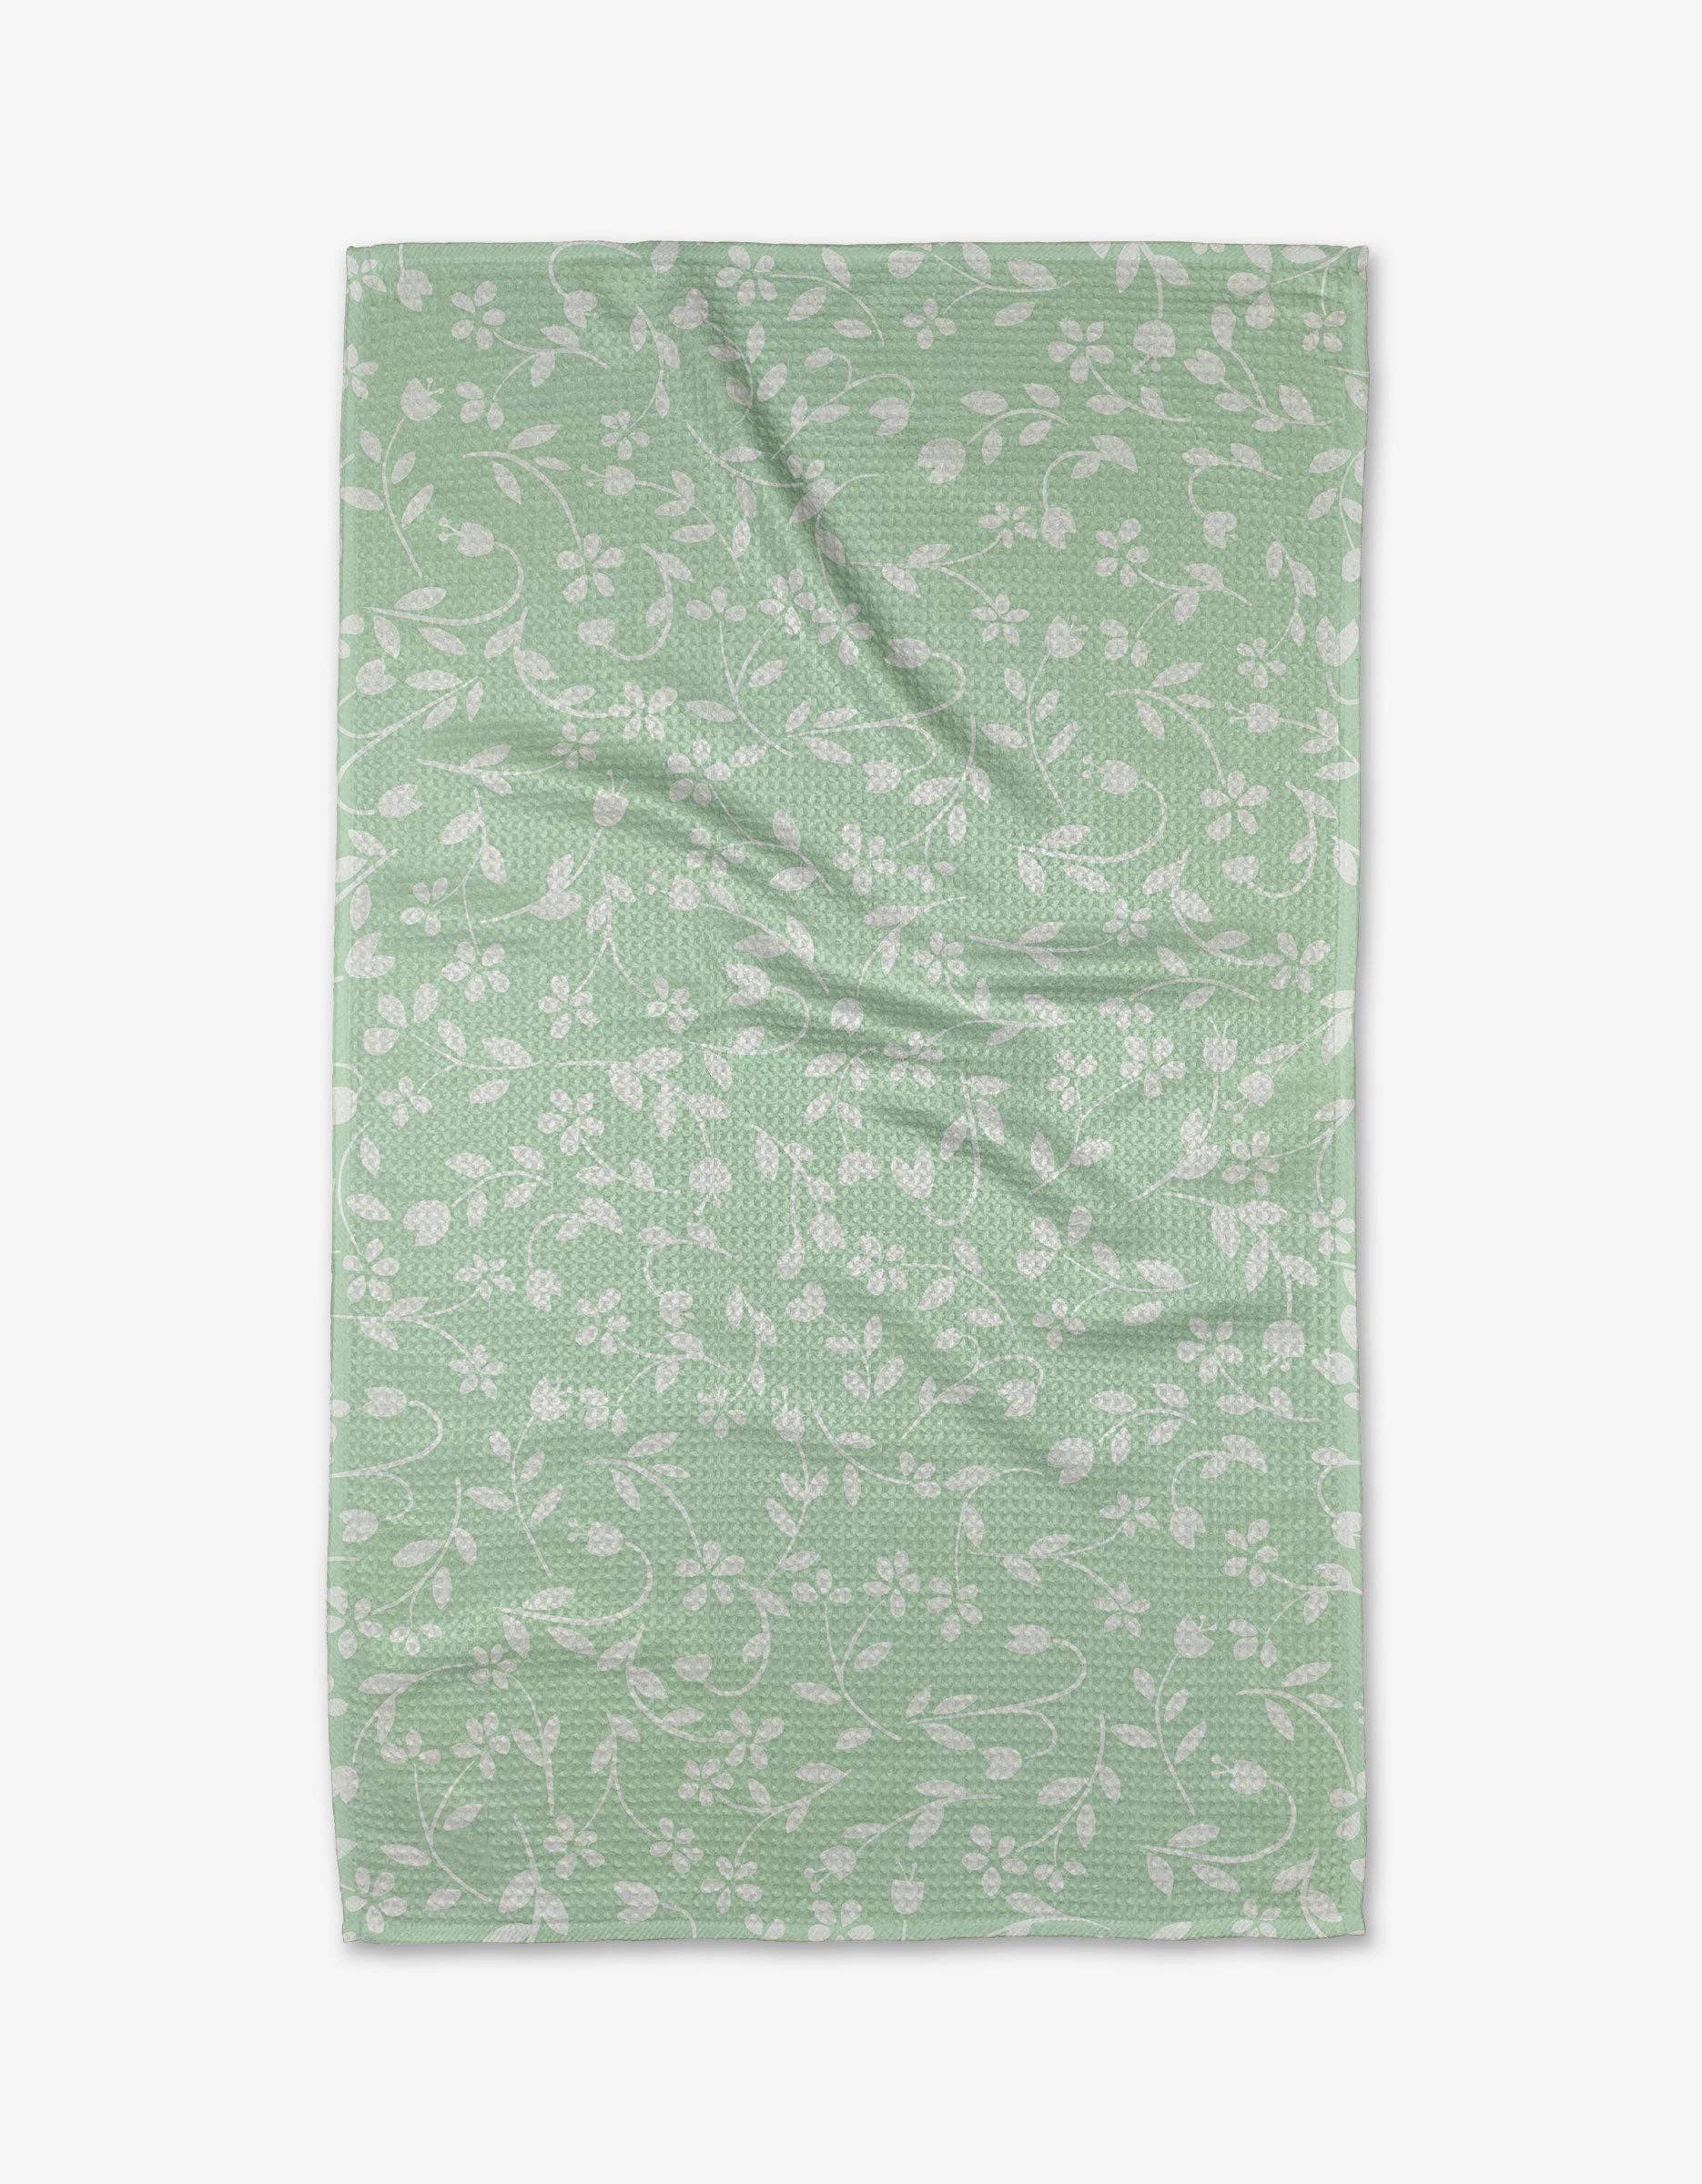 Dandy Tea Towel by Geometry. Tea Towel has a white florals on a light green background.